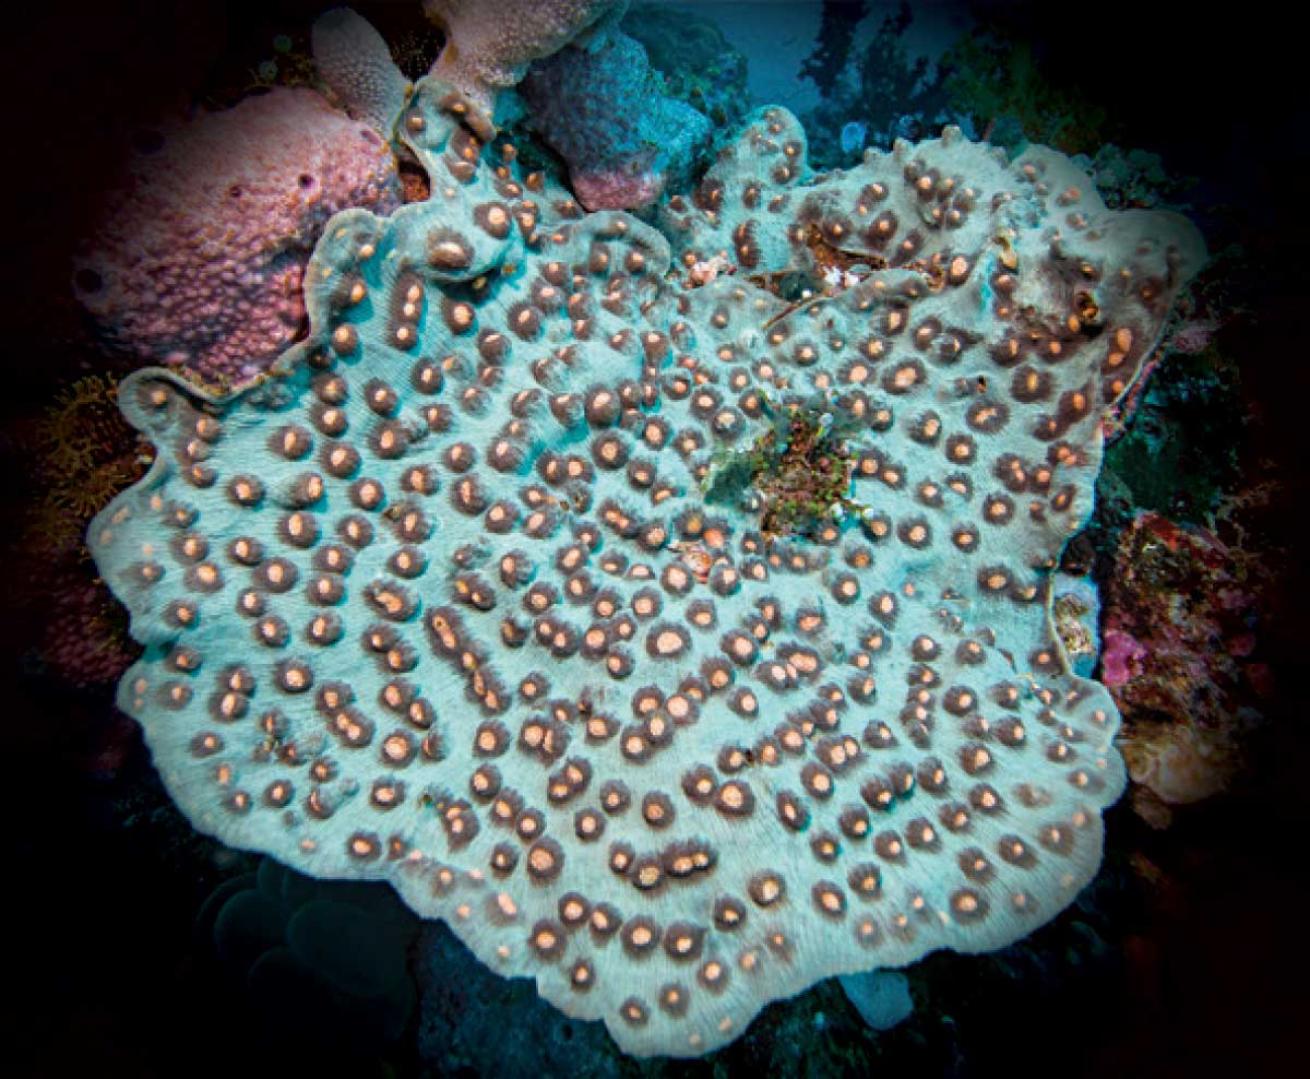 Elephant Nose Coral